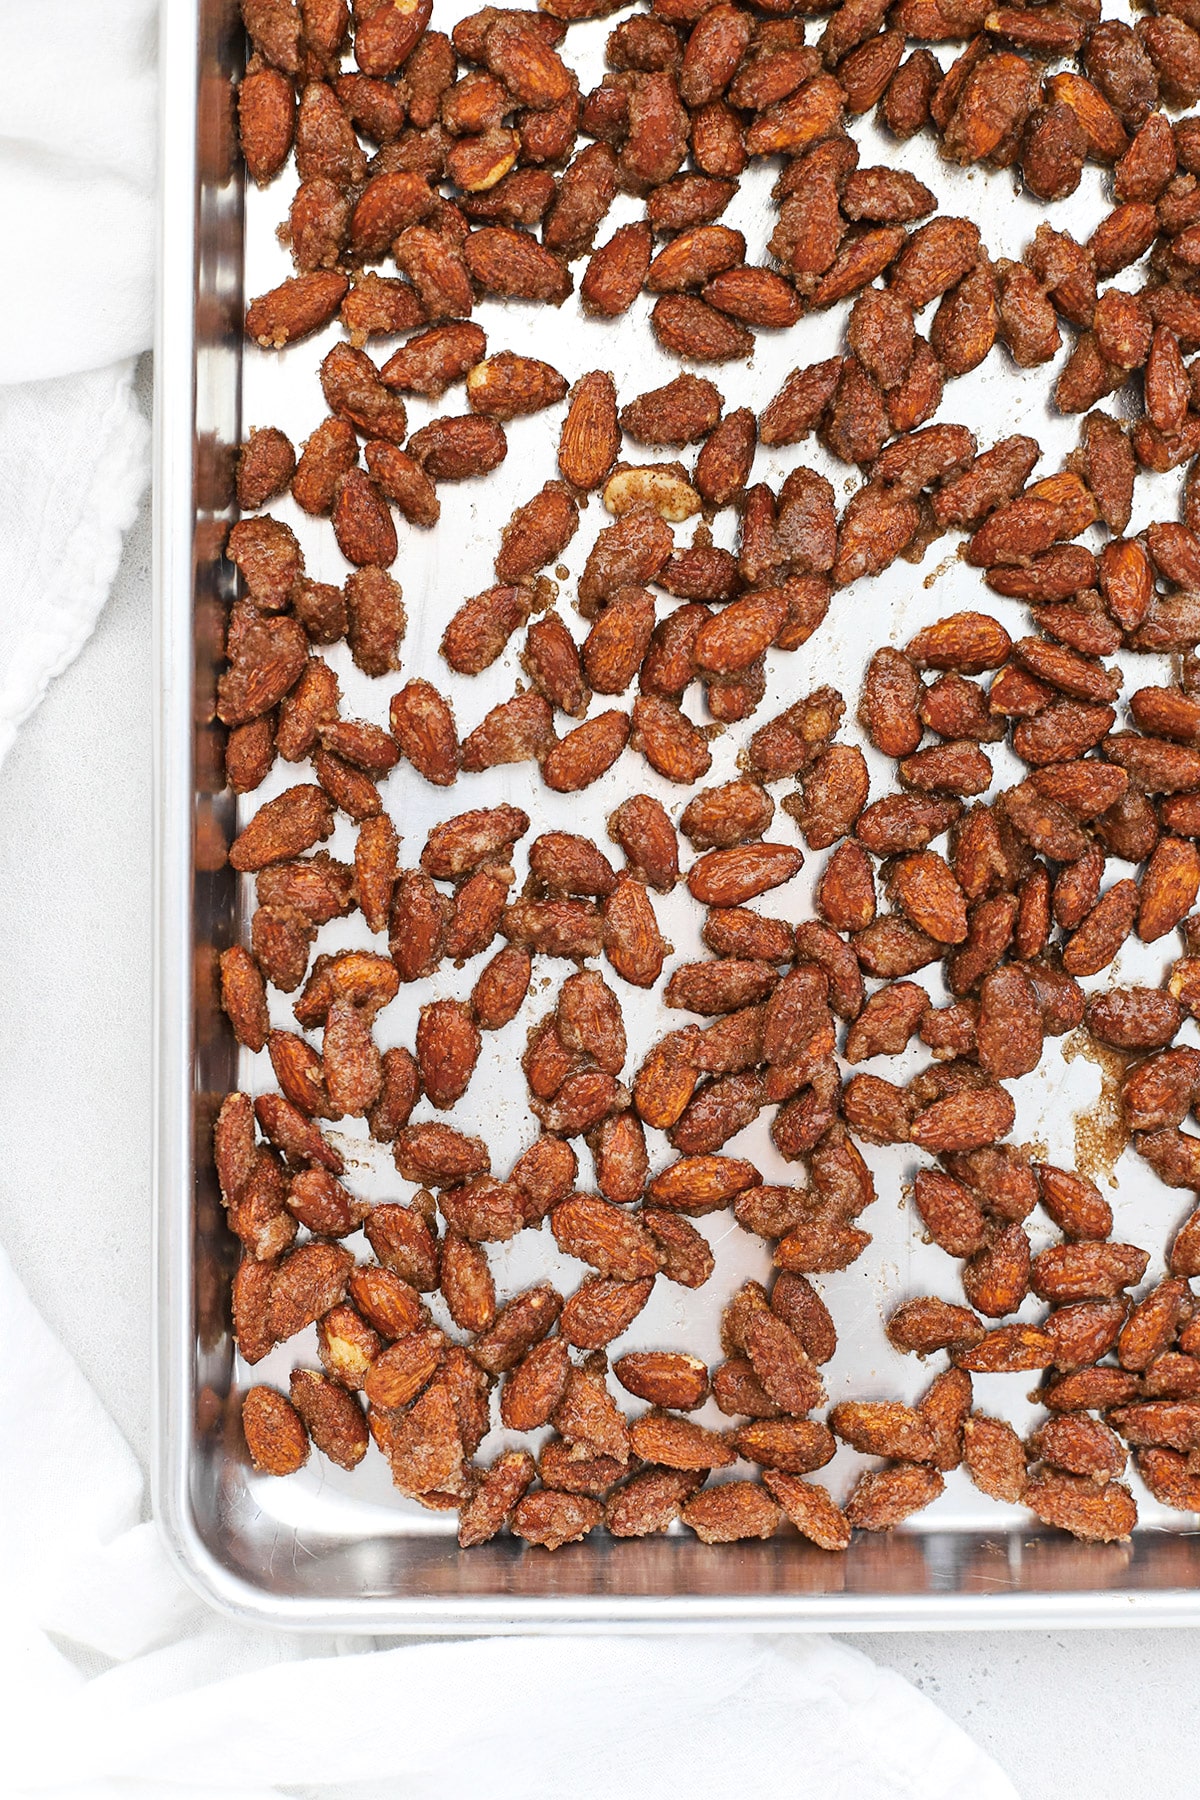 Overhead view of cinnamon almonds ready to go into the oven